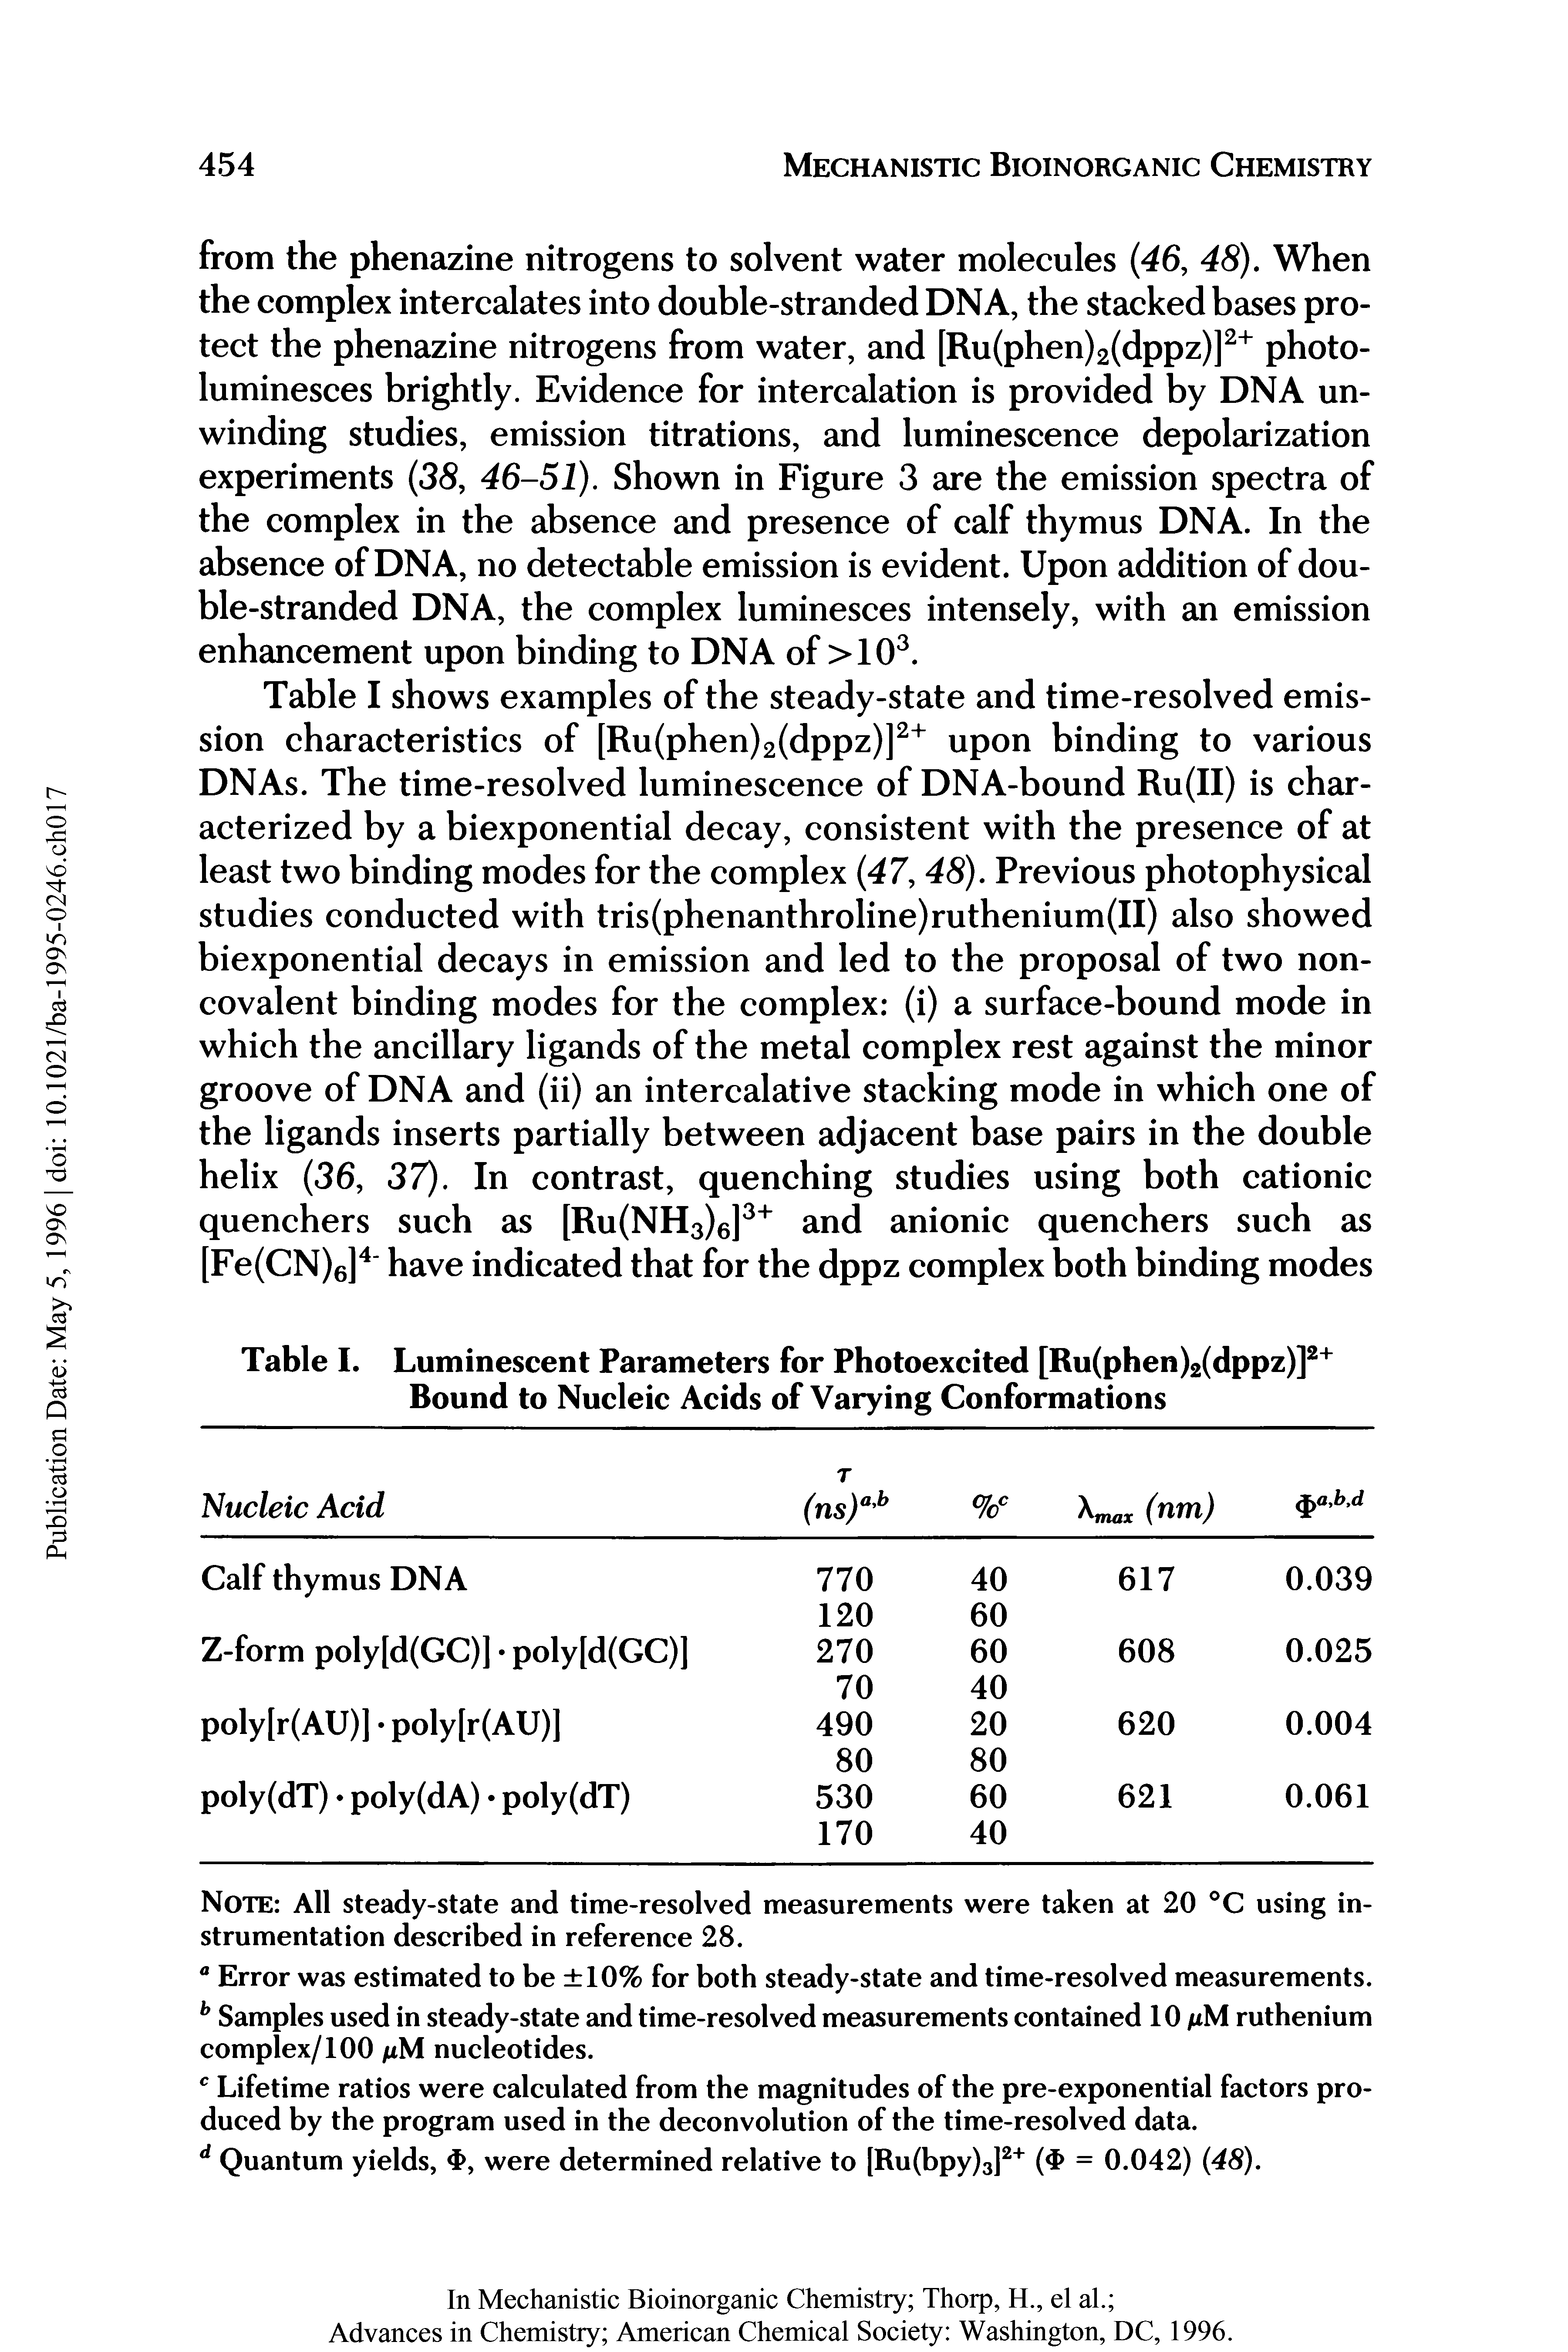 Table I shows examples of the steady-state and time-resolved emission characteristics of [Ru(phen)2(dppz)]2+ upon binding to various DNAs. The time-resolved luminescence of DNA-bound Ru(II) is characterized by a biexponential decay, consistent with the presence of at least two binding modes for the complex (47, 48). Previous photophysical studies conducted with tris(phenanthroline)ruthenium(II) also showed biexponential decays in emission and led to the proposal of two non-covalent binding modes for the complex (i) a surface-bound mode in which the ancillary ligands of the metal complex rest against the minor groove of DNA and (ii) an intercalative stacking mode in which one of the ligands inserts partially between adjacent base pairs in the double helix (36, 37). In contrast, quenching studies using both cationic quenchers such as [Ru(NH3)6]3+ and anionic quenchers such as [Fe(CN)6]4 have indicated that for the dppz complex both binding modes...